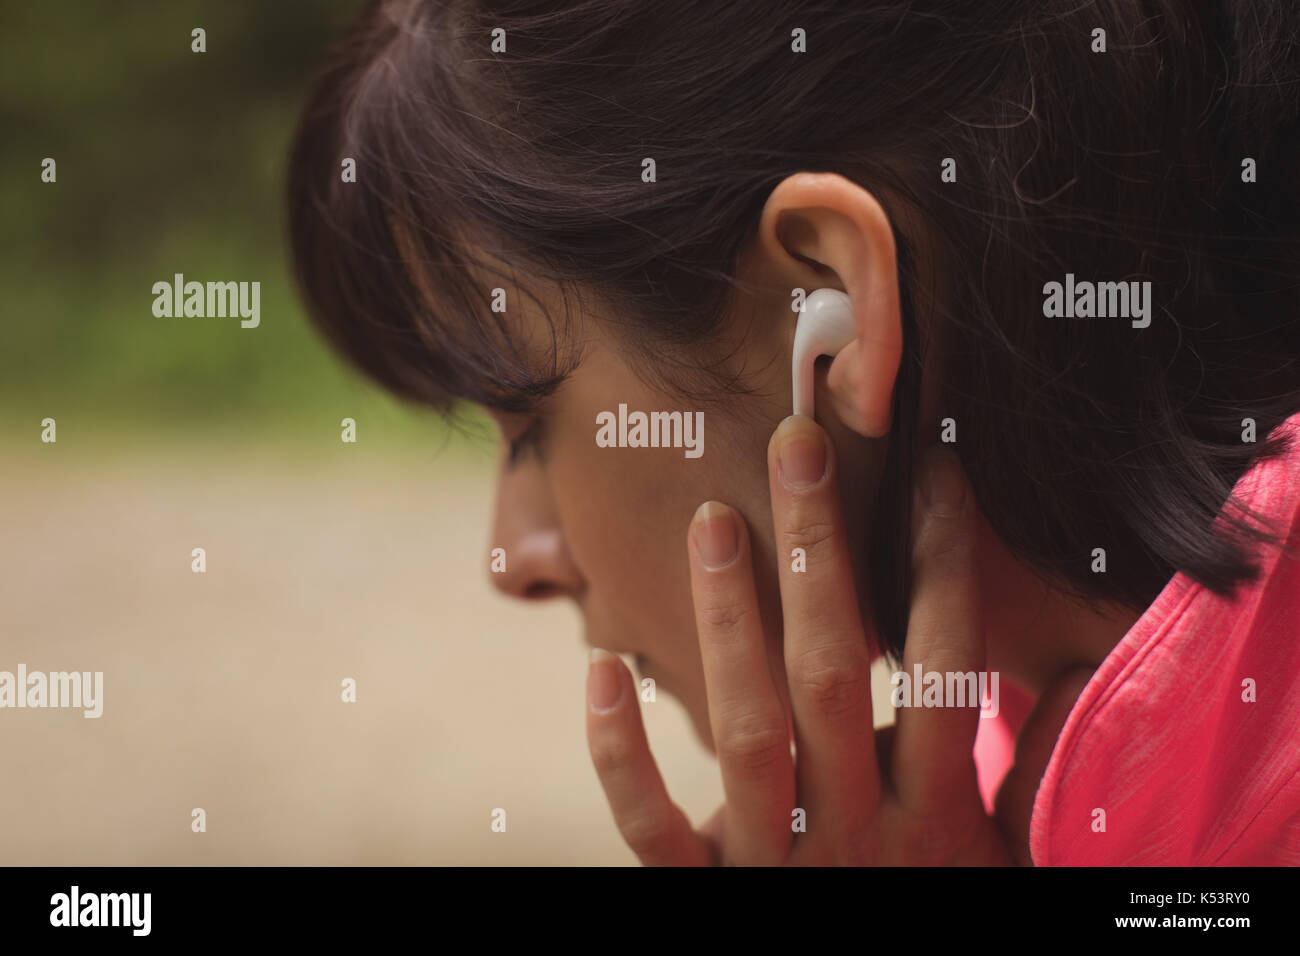 Close-up of woman listening music on headphones in forest Stock Photo